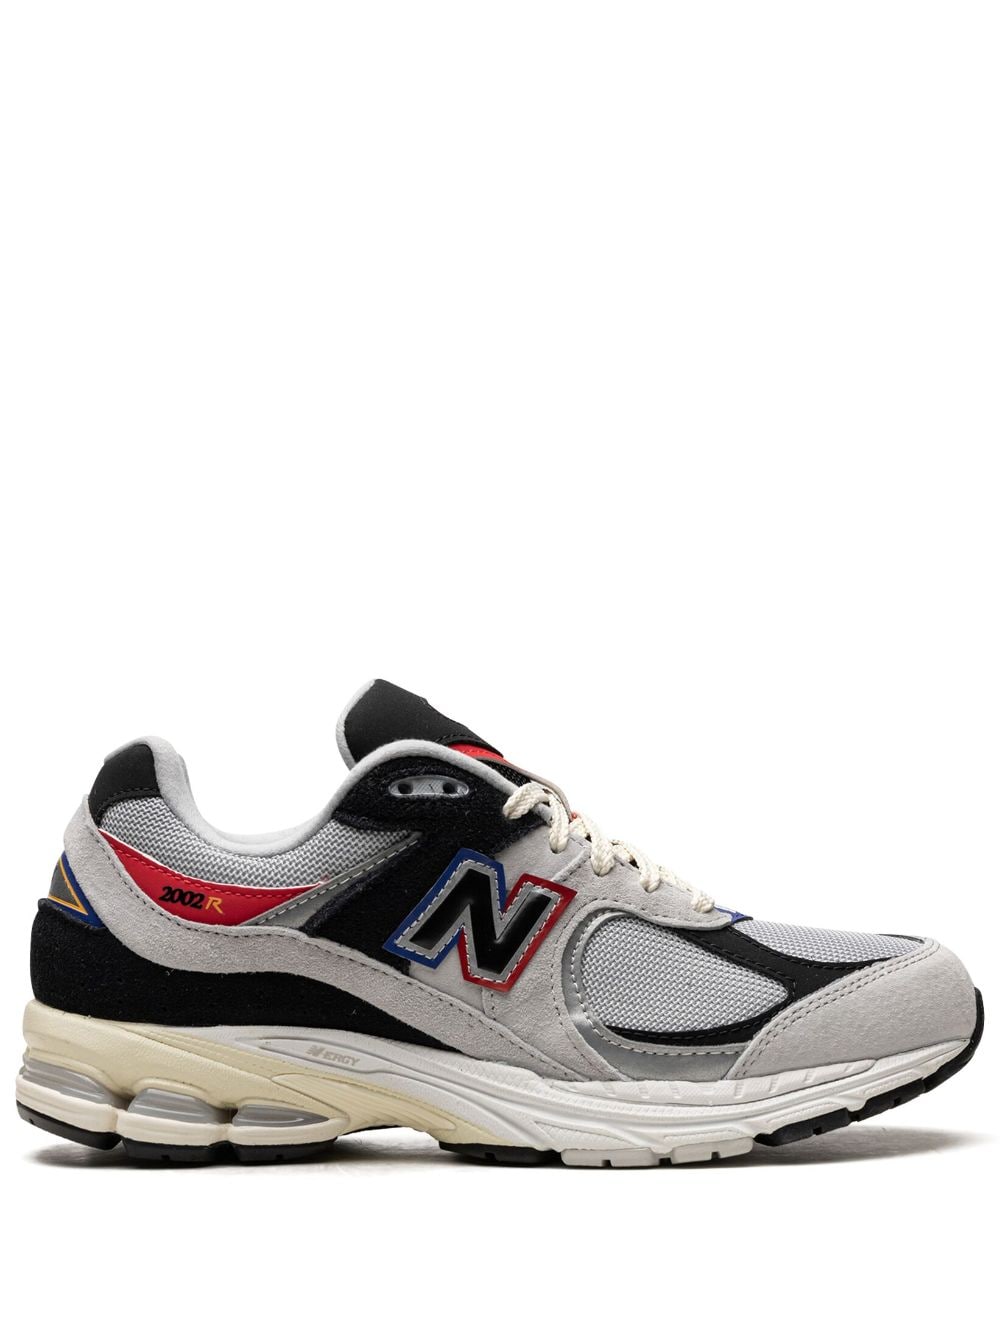 New Balance 2002R "DTLR - Virginia Is For Lovers" sneakers - Black